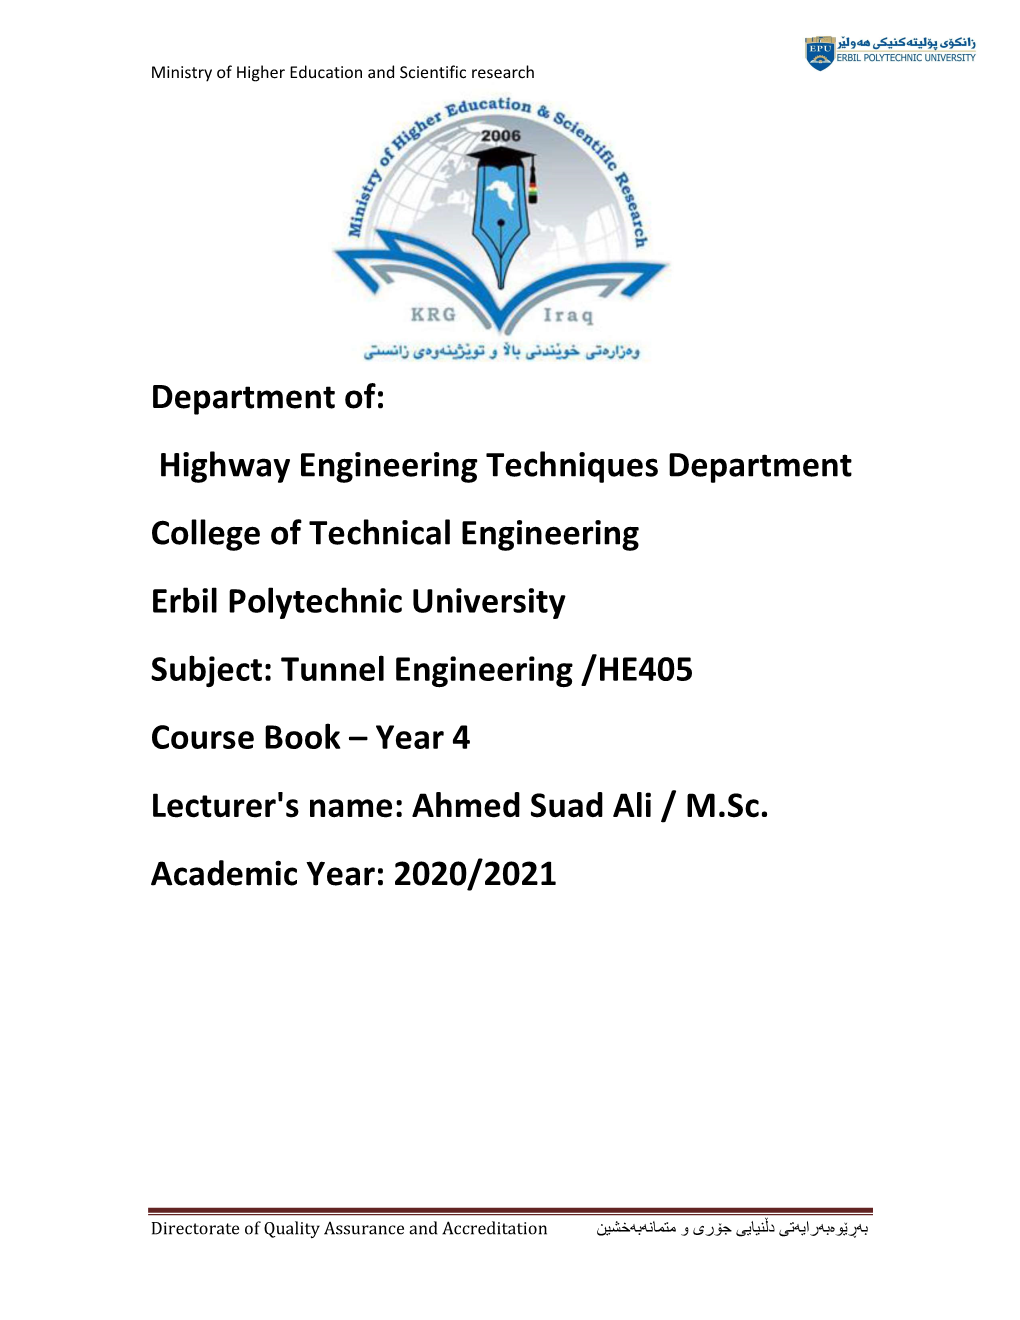 Highway Engineering Techniques Department College of Technical